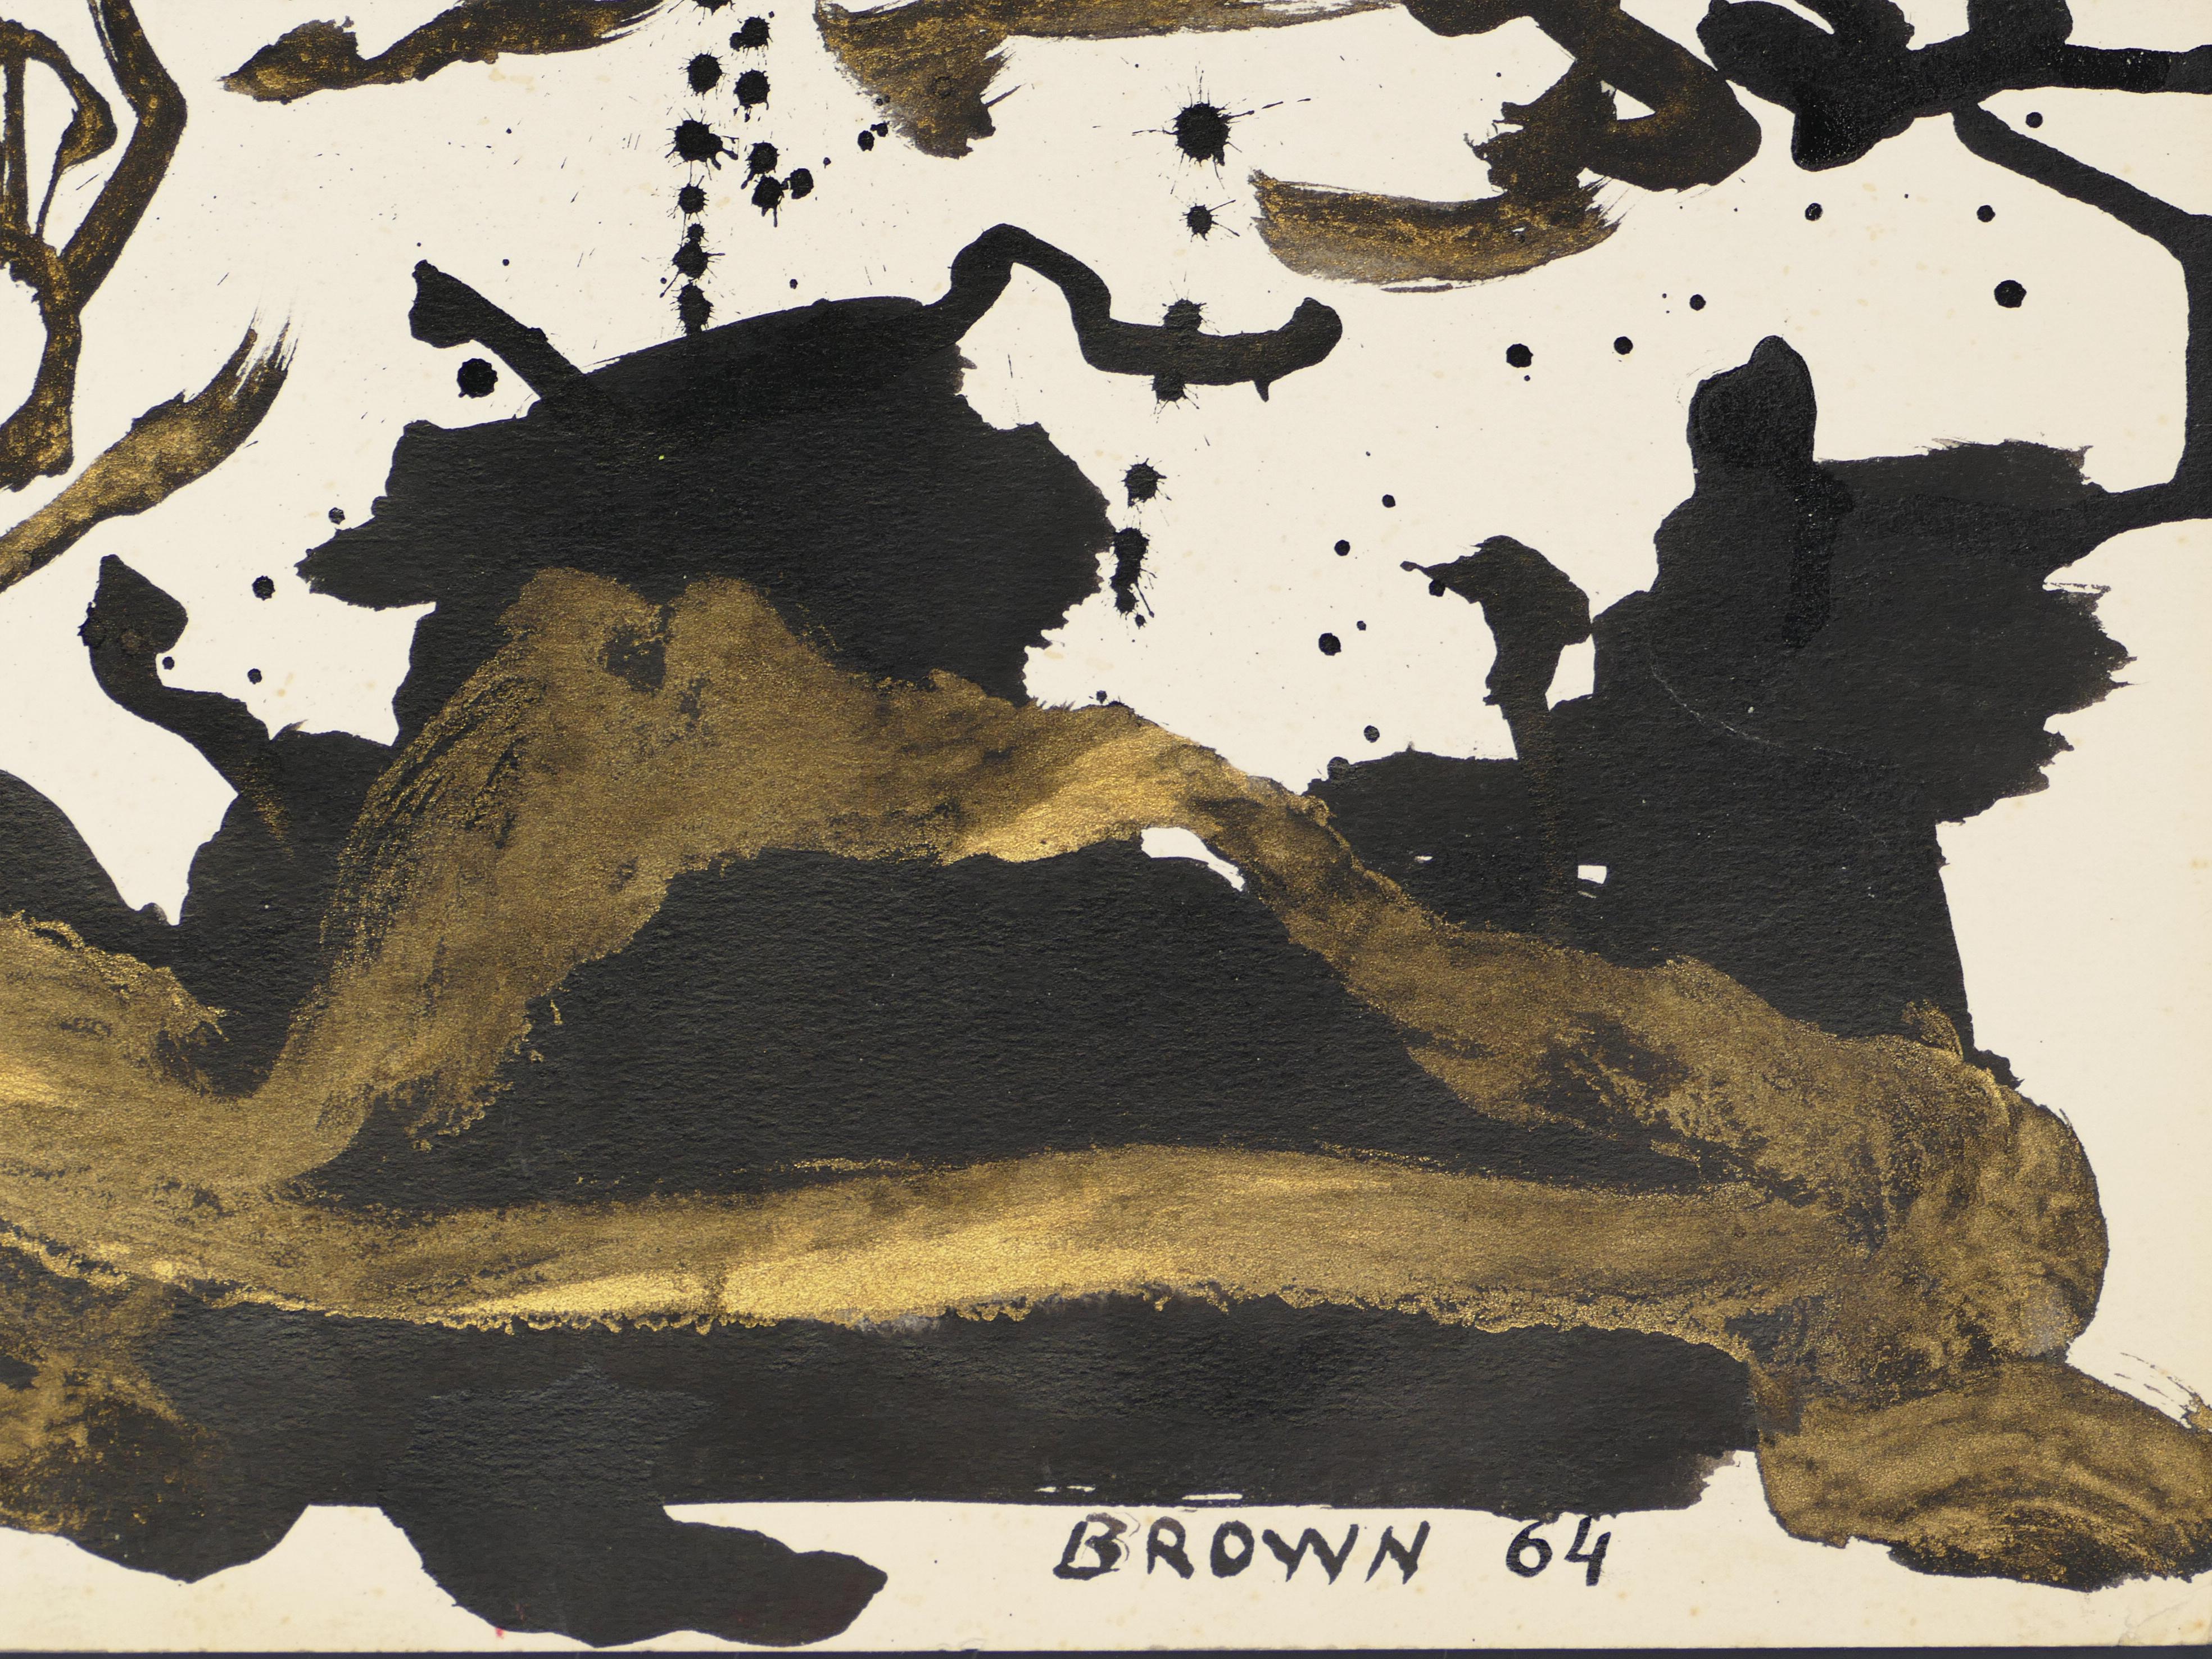 Abstract Golden Composition - Original Tempera on Paper by J.-J. Brown - 1964 - Painting by James-Jacques Brown